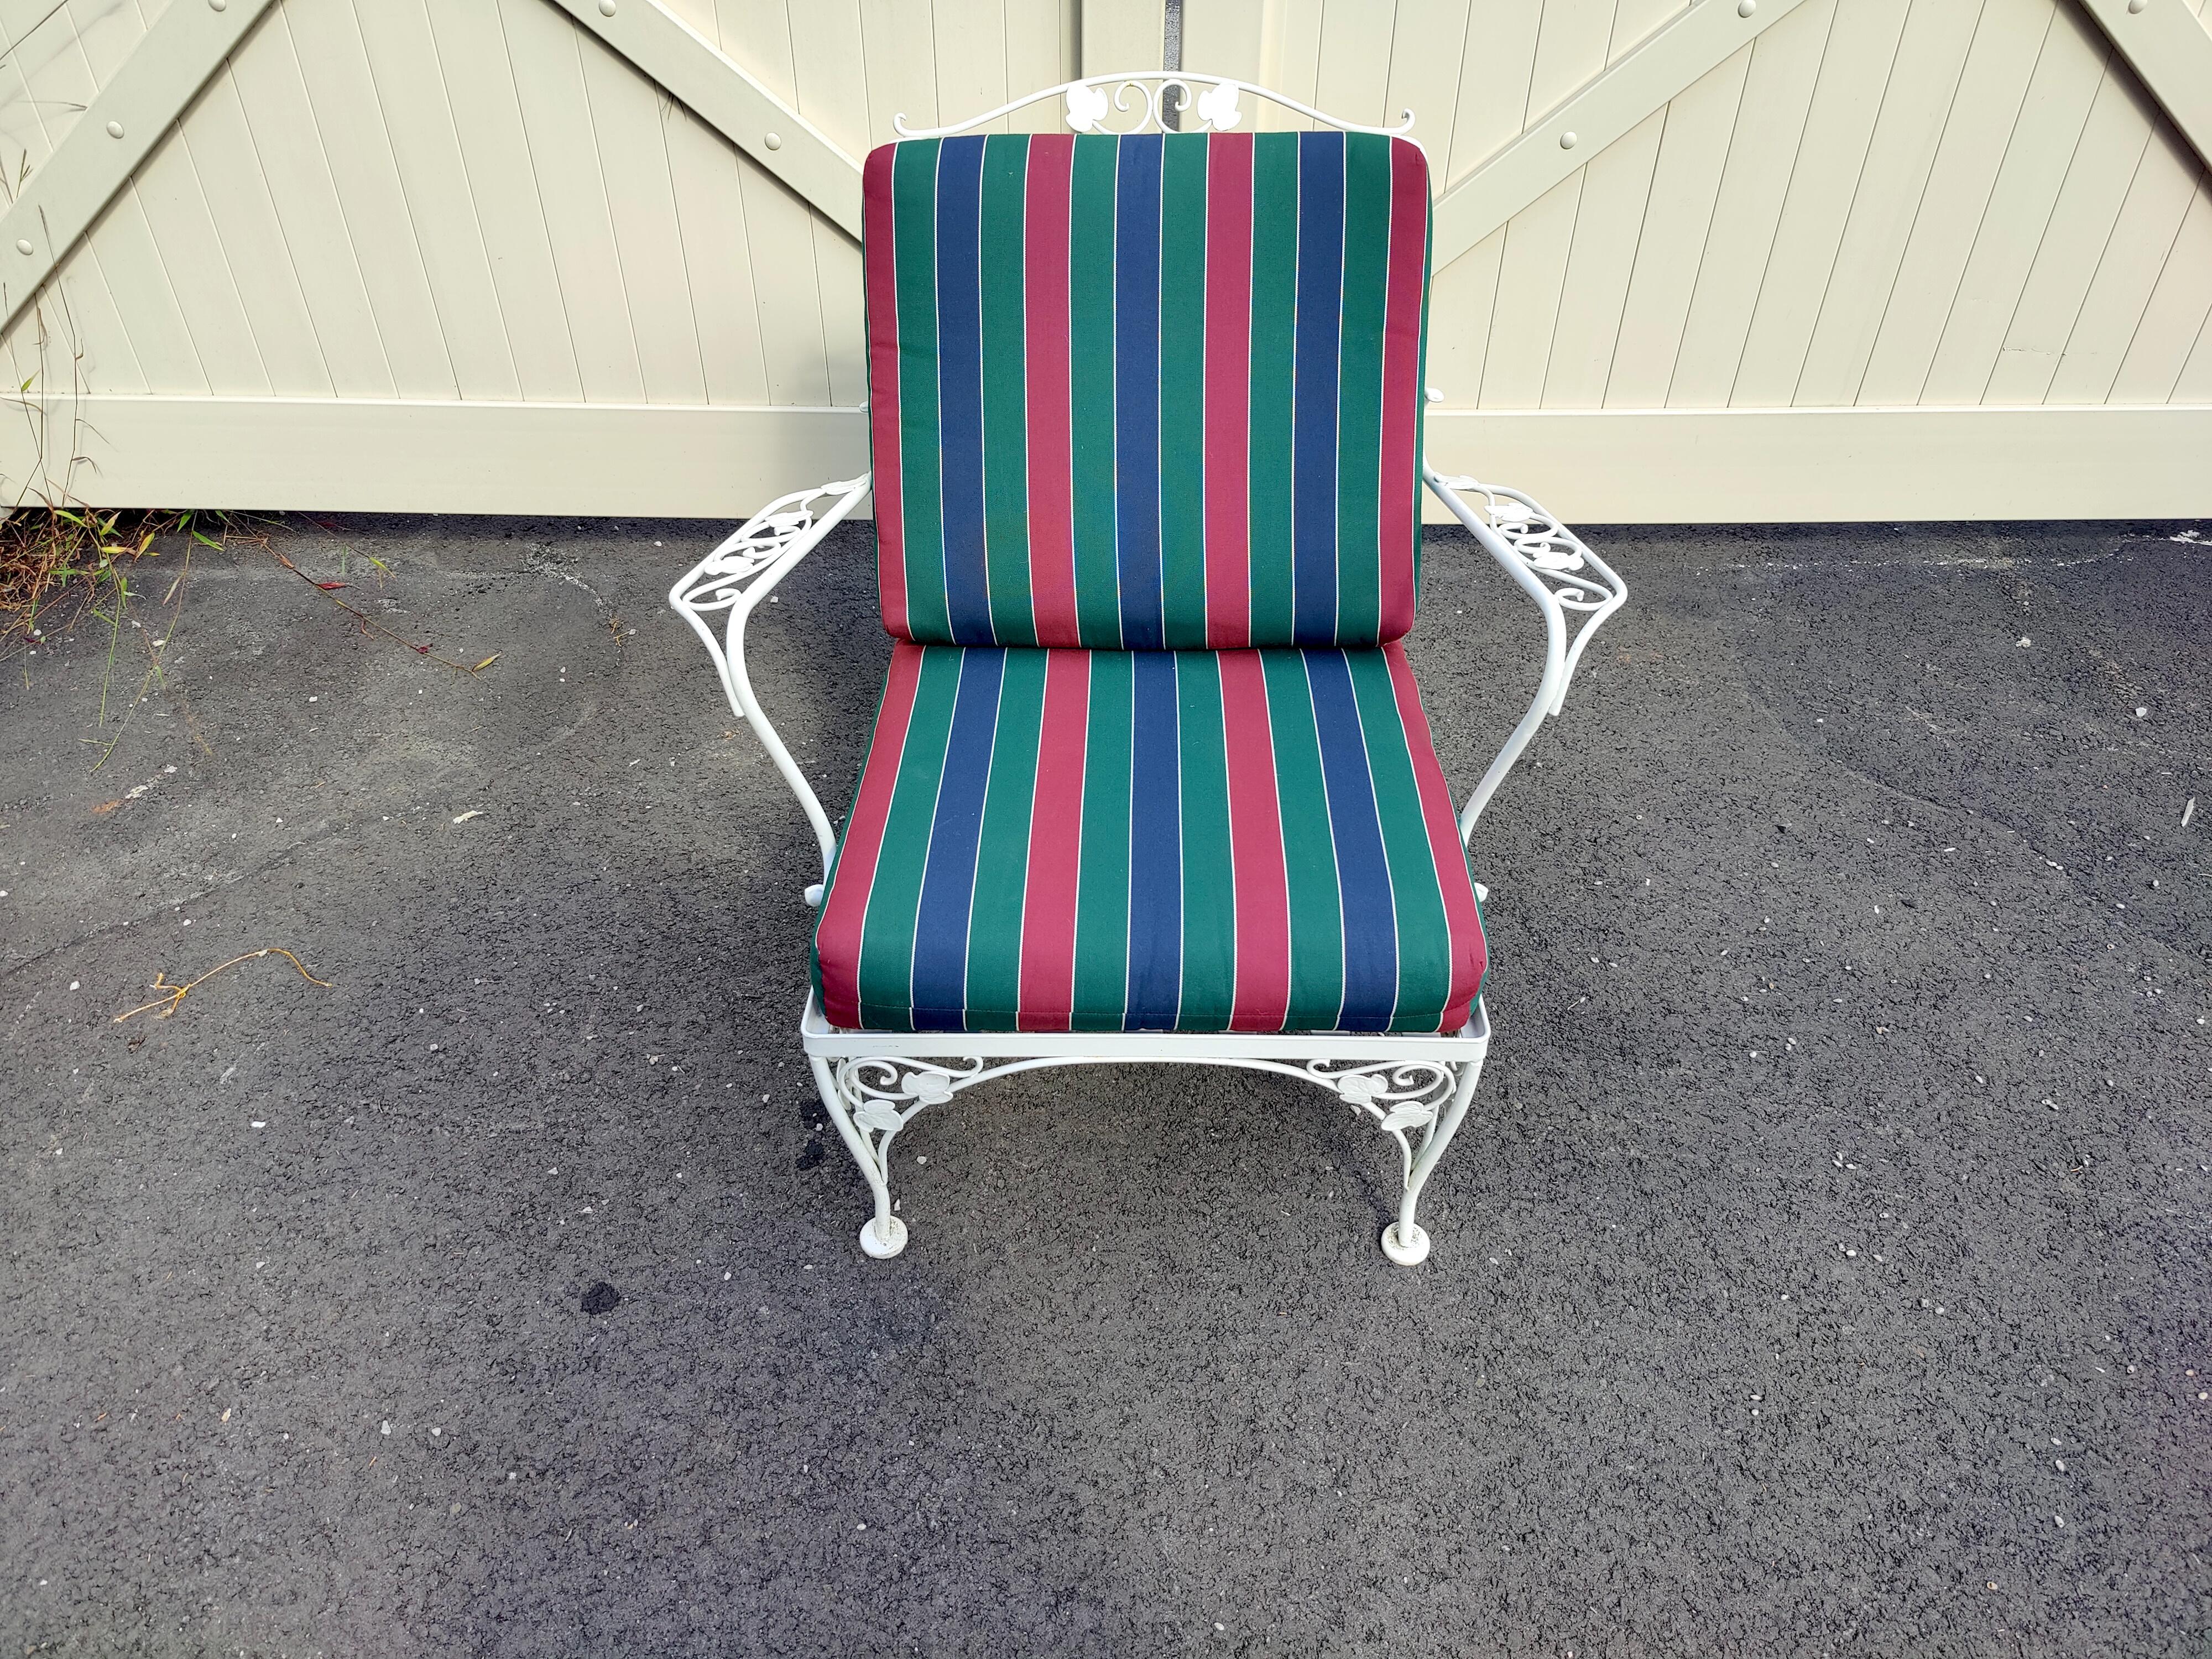 ( 1 ) Mid-Century Modern outdoor lounge chair. Made out of sturdy wrought iron. This lounge chair features elegant scrollwork and floral designs, Perfect for any patio, pool, balcony setting. Cushion included

(Please confirm item location - NY or